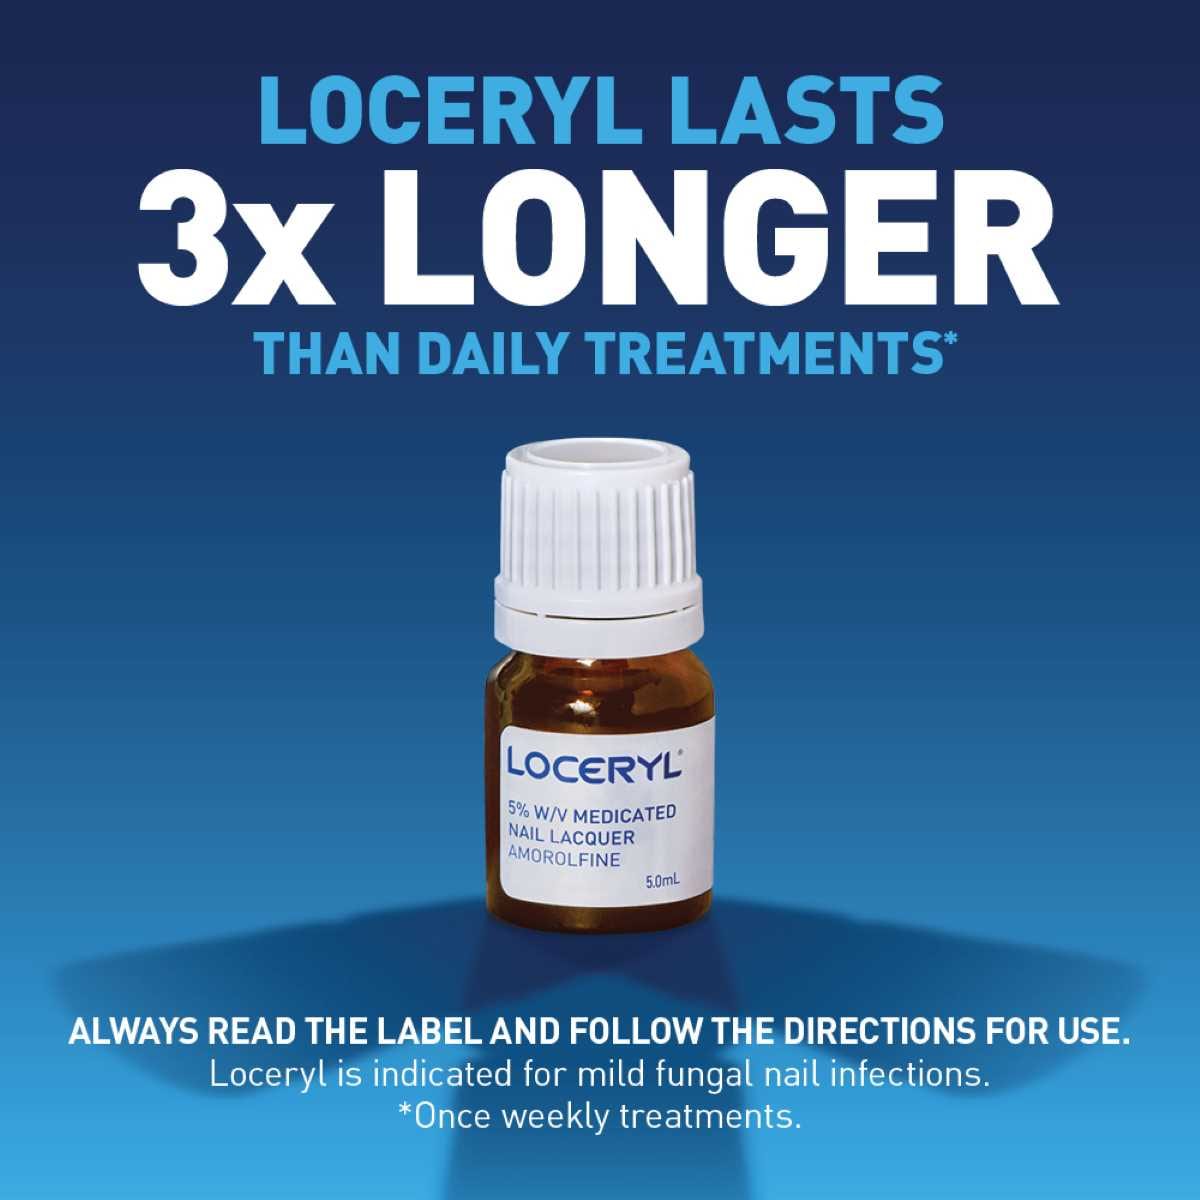 Loceryl Nail Lacquer 5ml Offer at Priceline - 1Catalogue.com.au